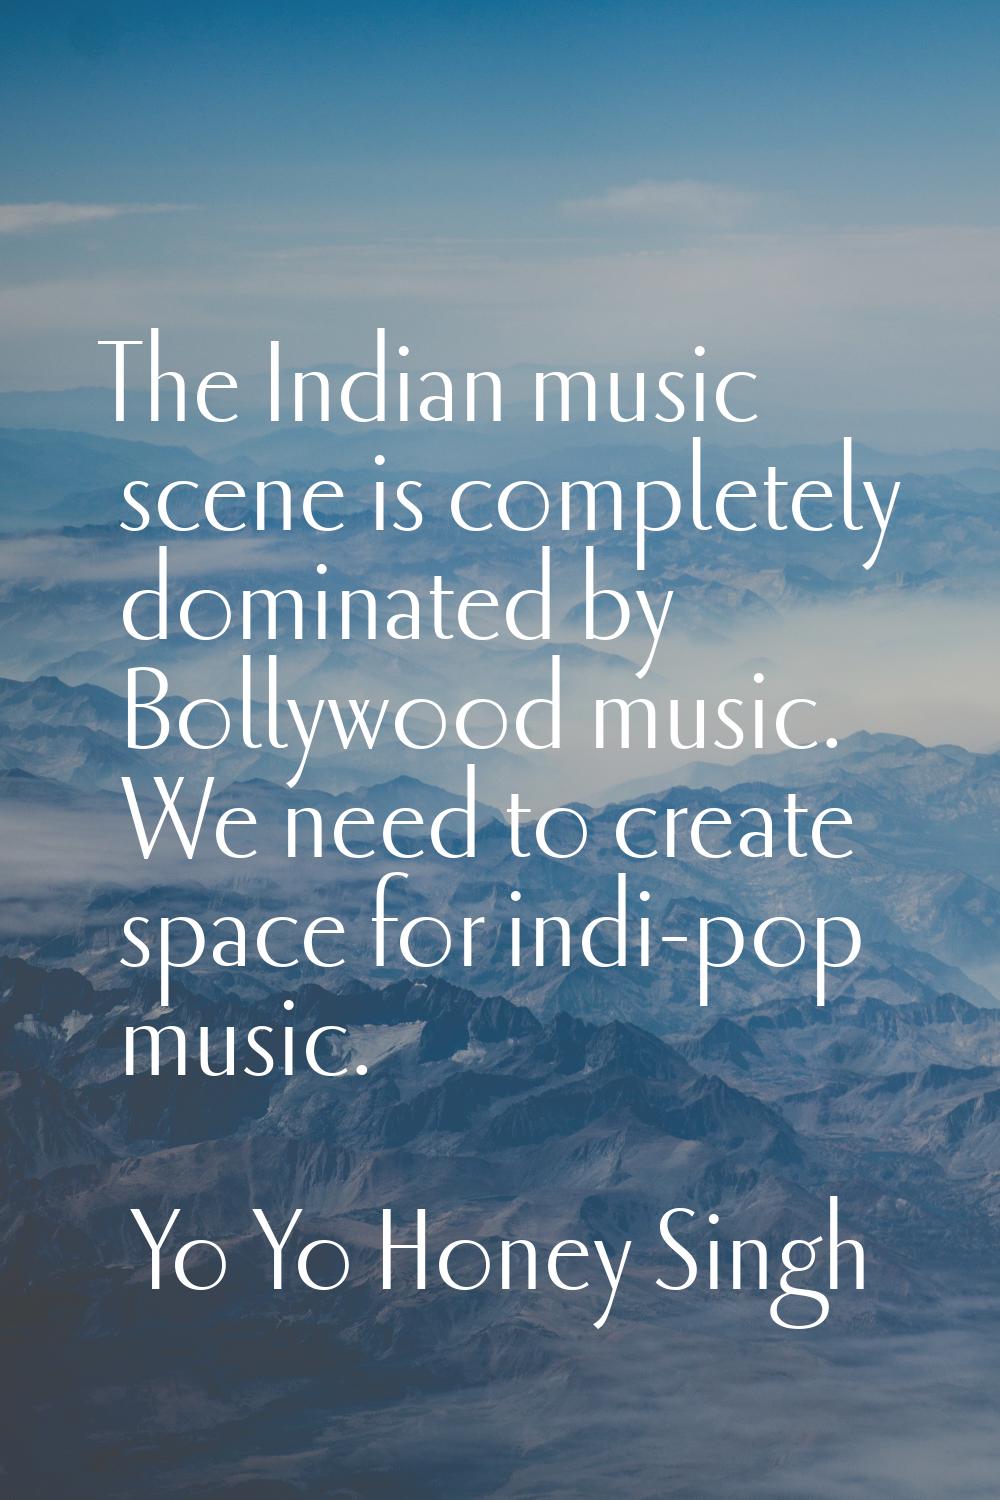 The Indian music scene is completely dominated by Bollywood music. We need to create space for indi